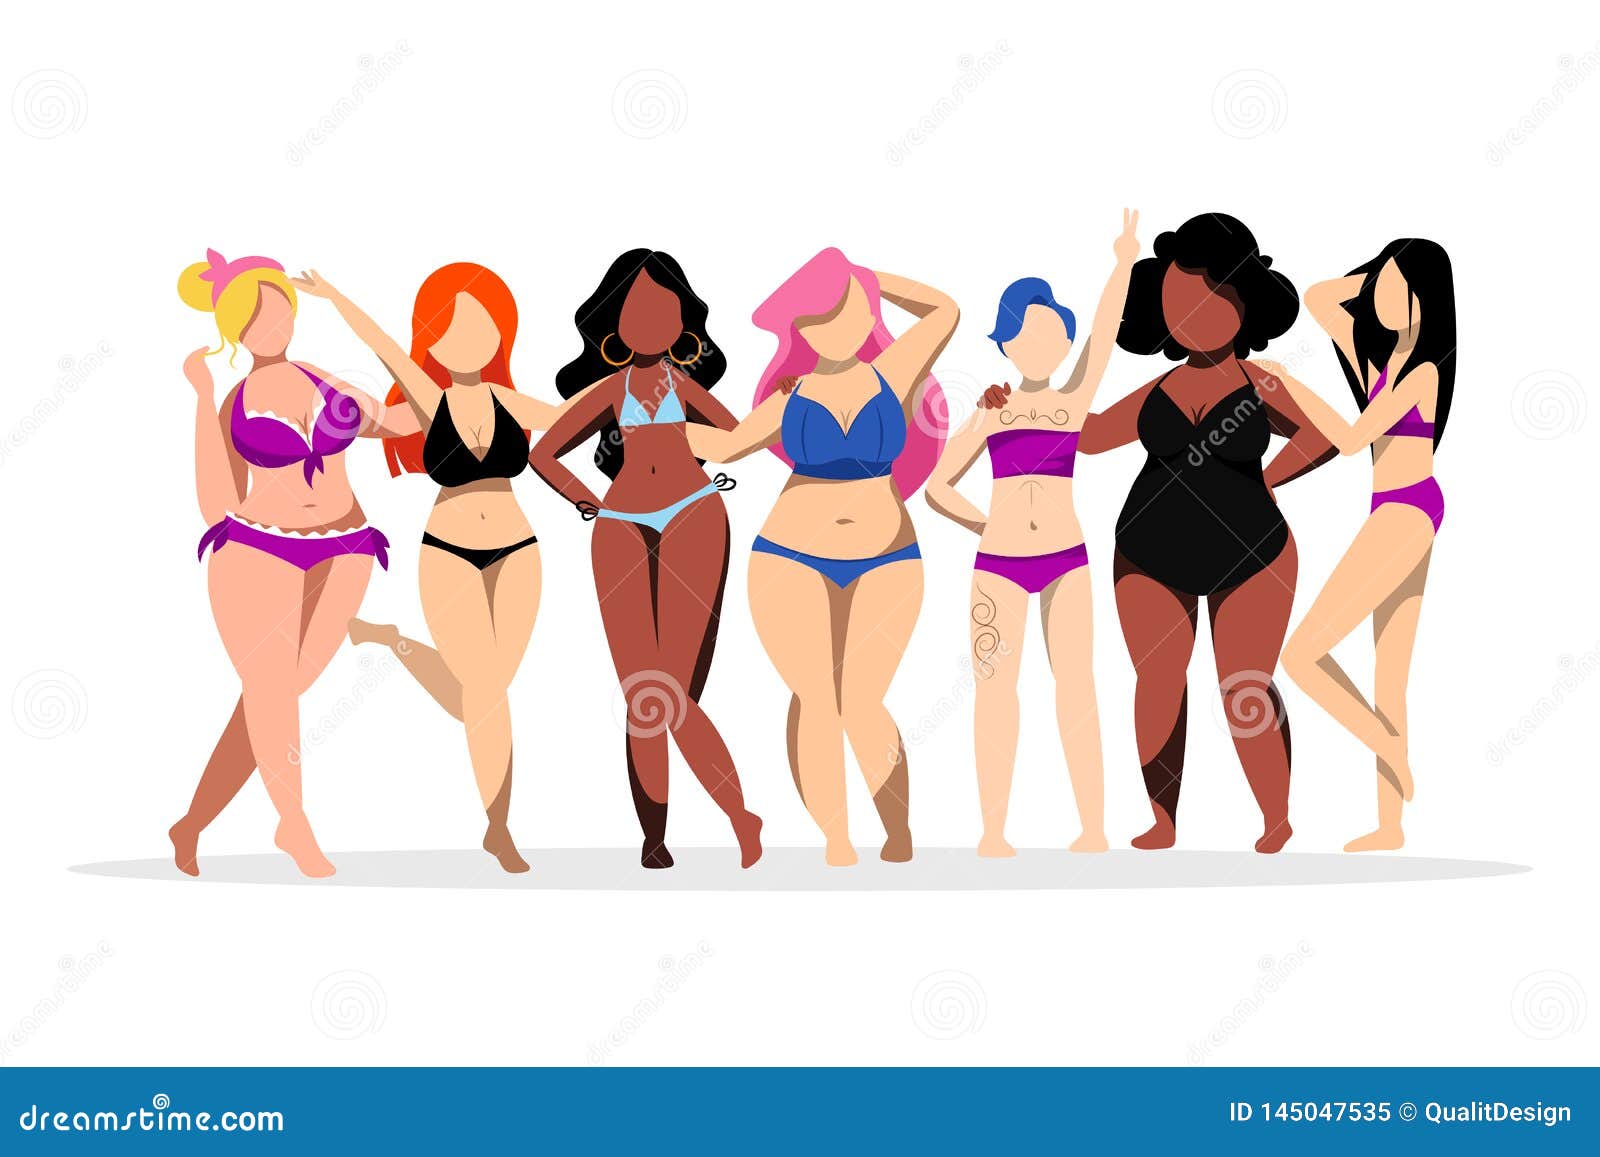 women with different figures, skin colors. body positive concept.  flat . plus size girls in bikini